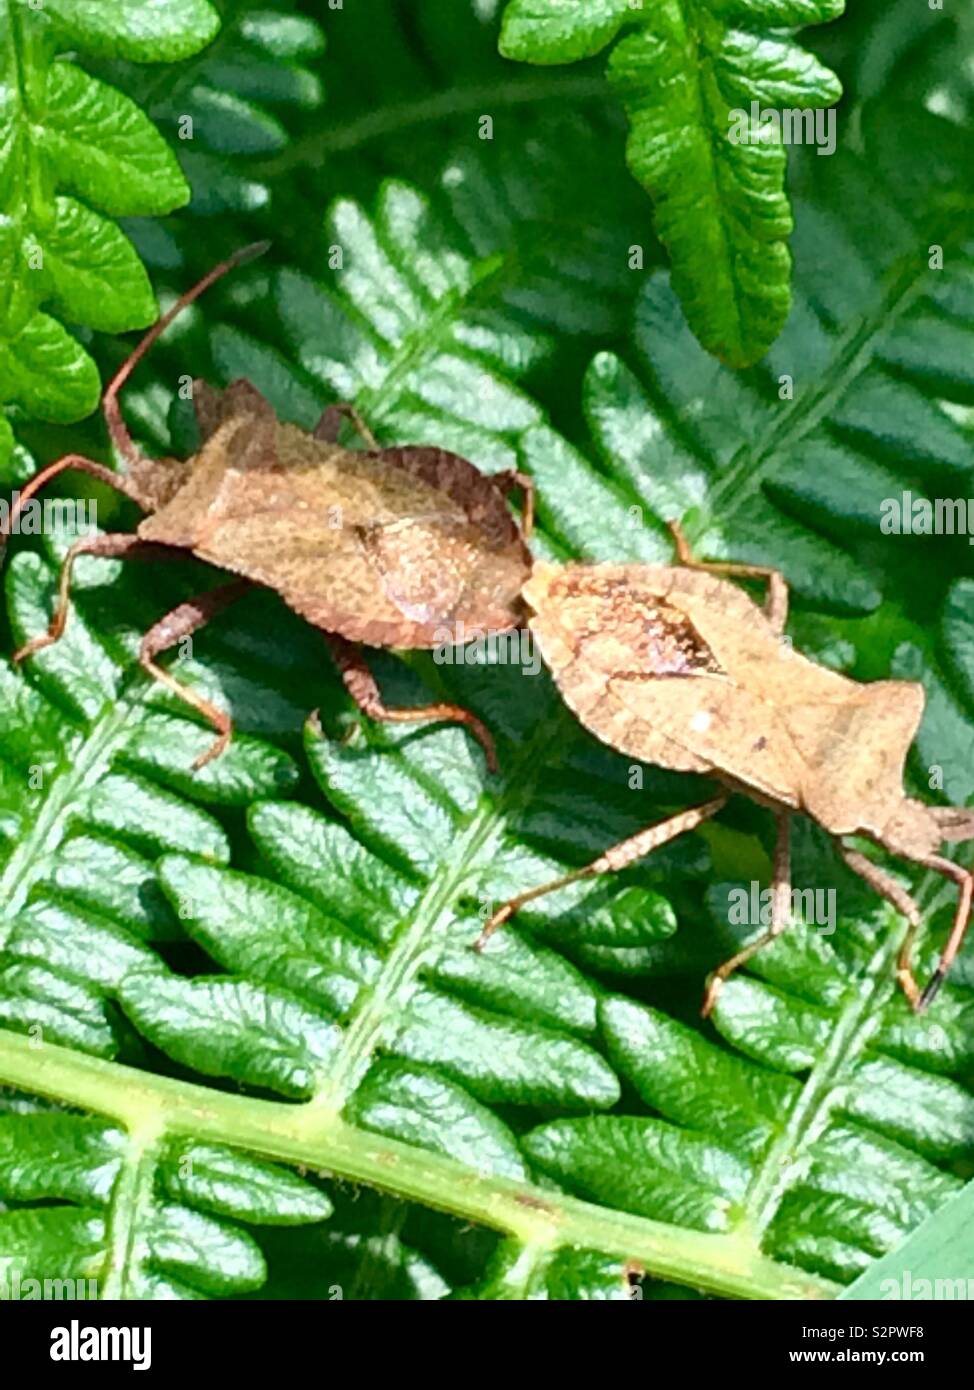 Shield bugs mating on a fern Stock Photo